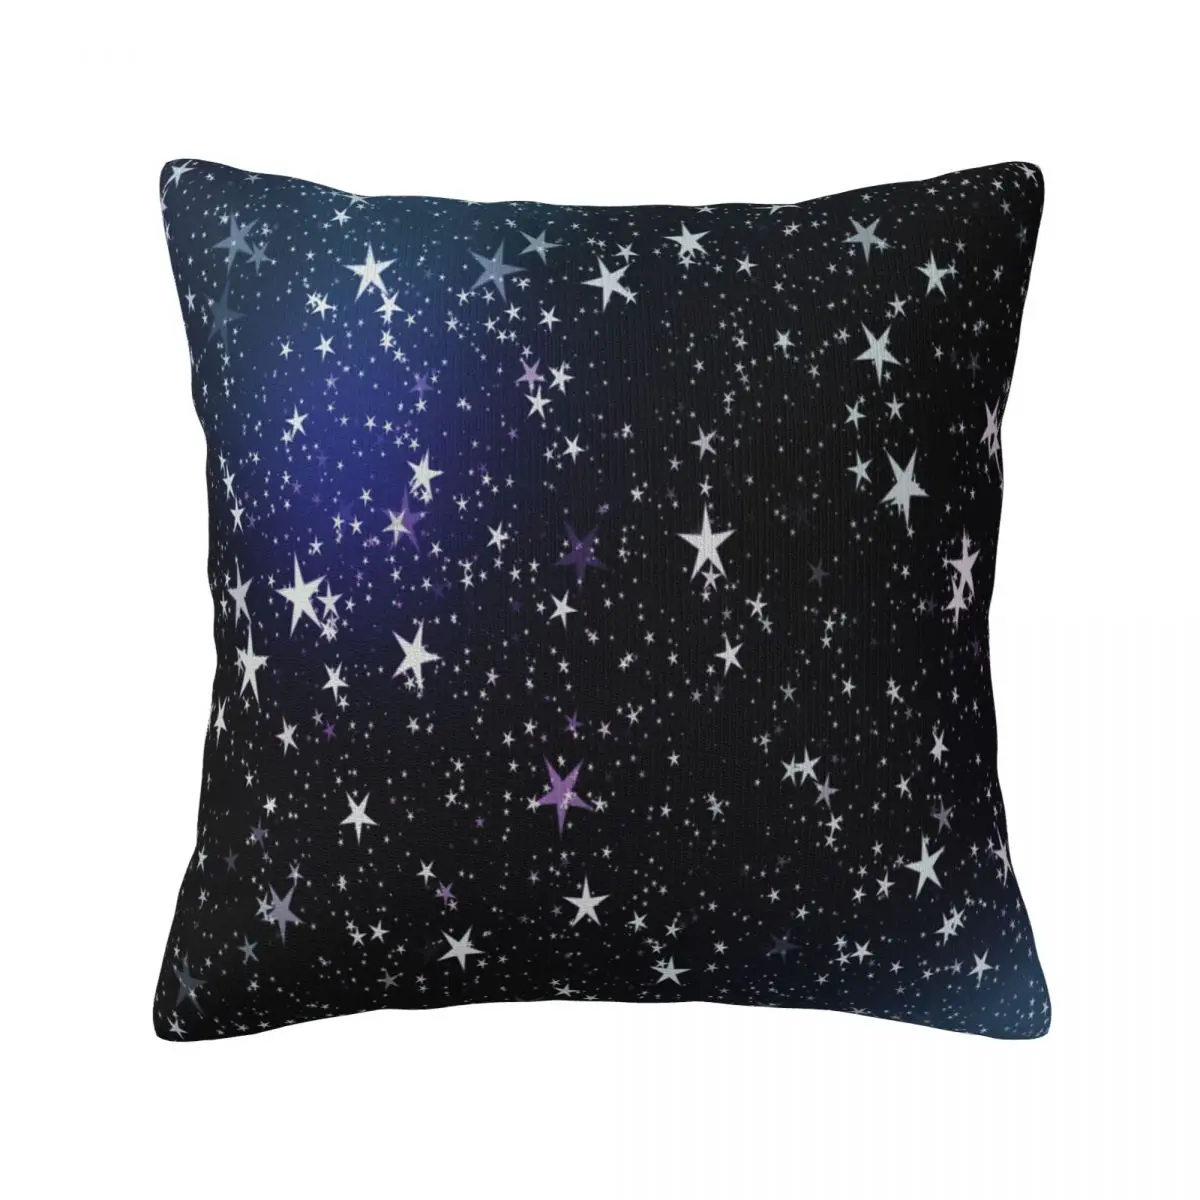 

Blue Sky And Star Throw Pillow Cover Decorative Pillow Covers Home Pillows Shells Cushion Cover Zippered Pillowcase